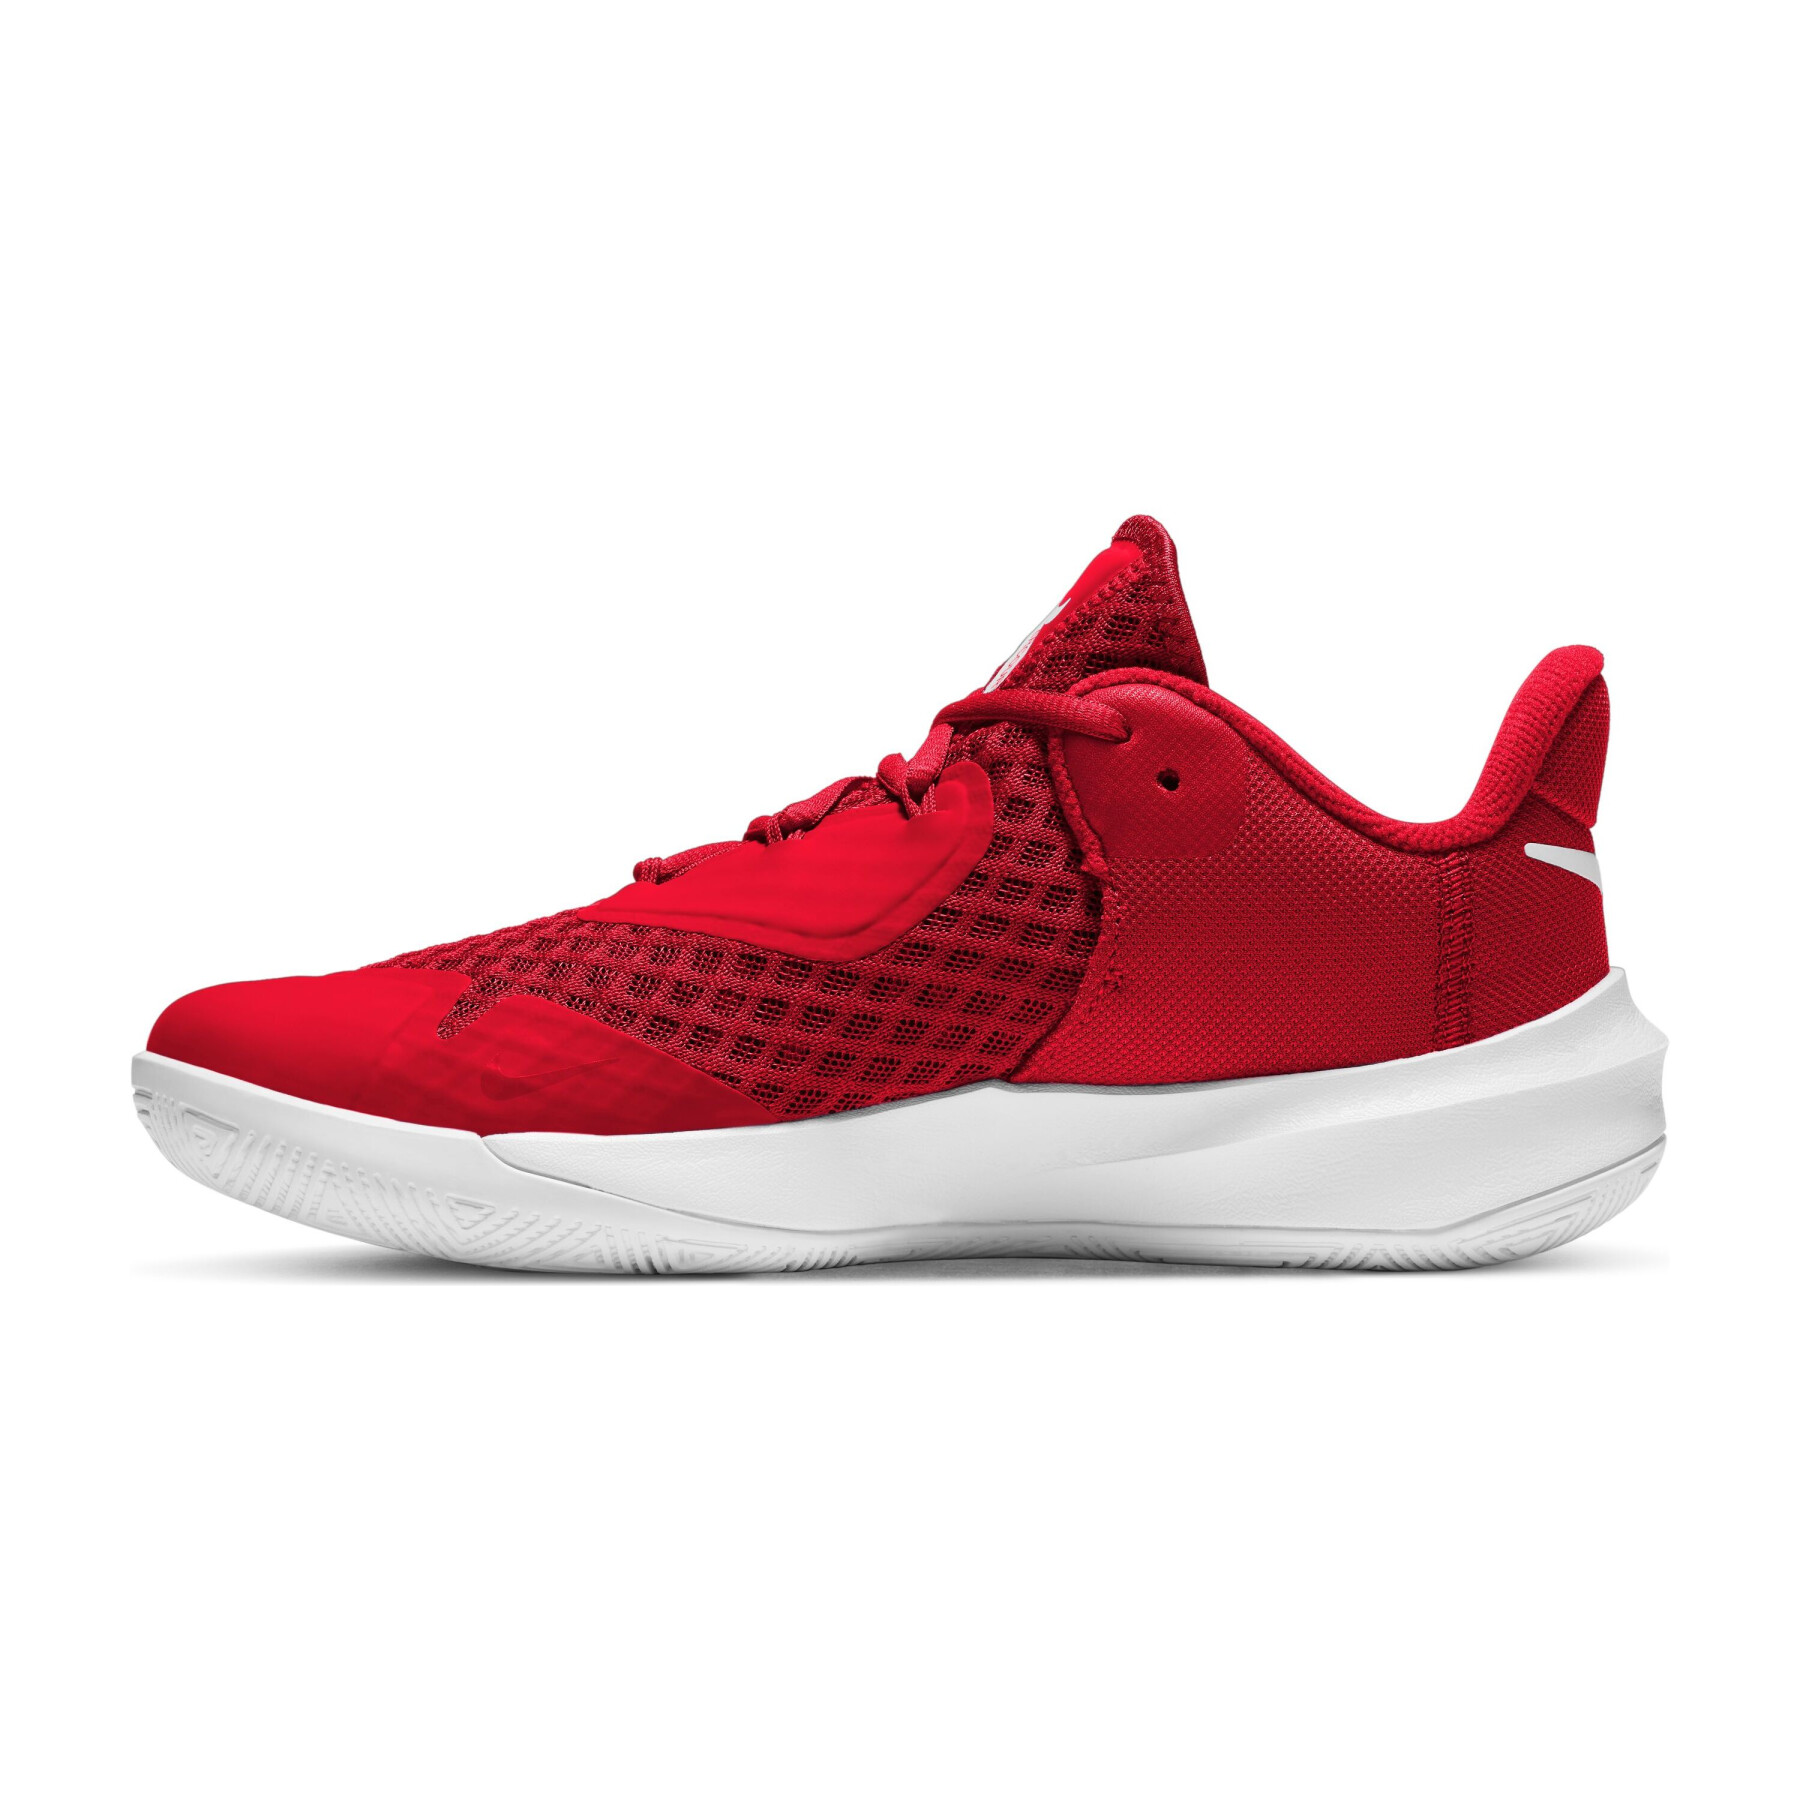 Zapatos de mujer Nike Hyperspeed Court